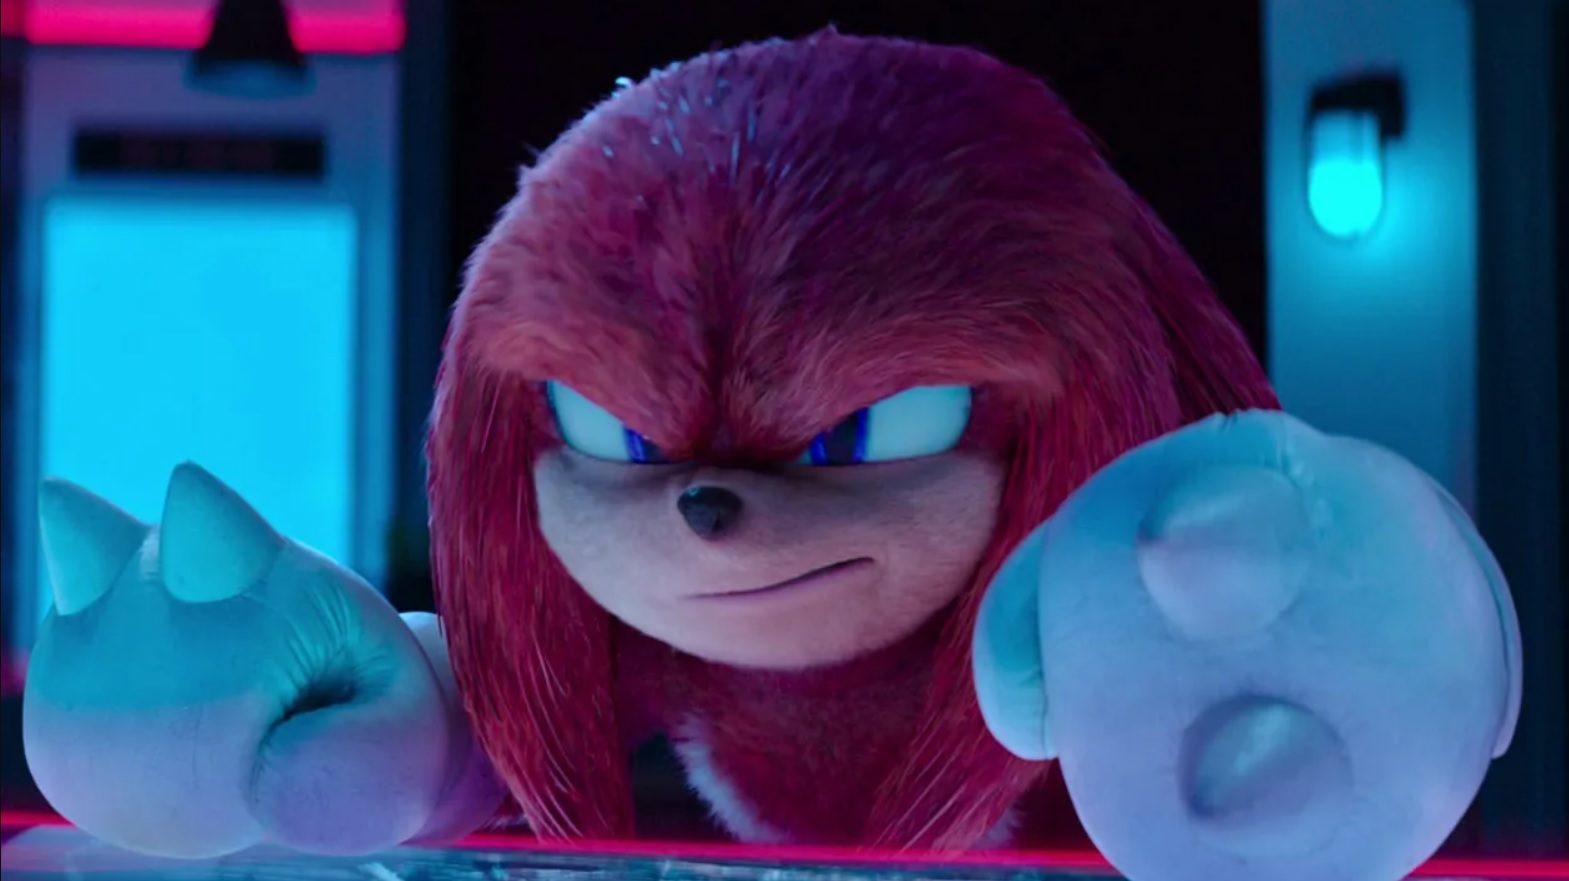 Knuckles Cast Unveiled for Sonic the Hedgehog Spinoff Series